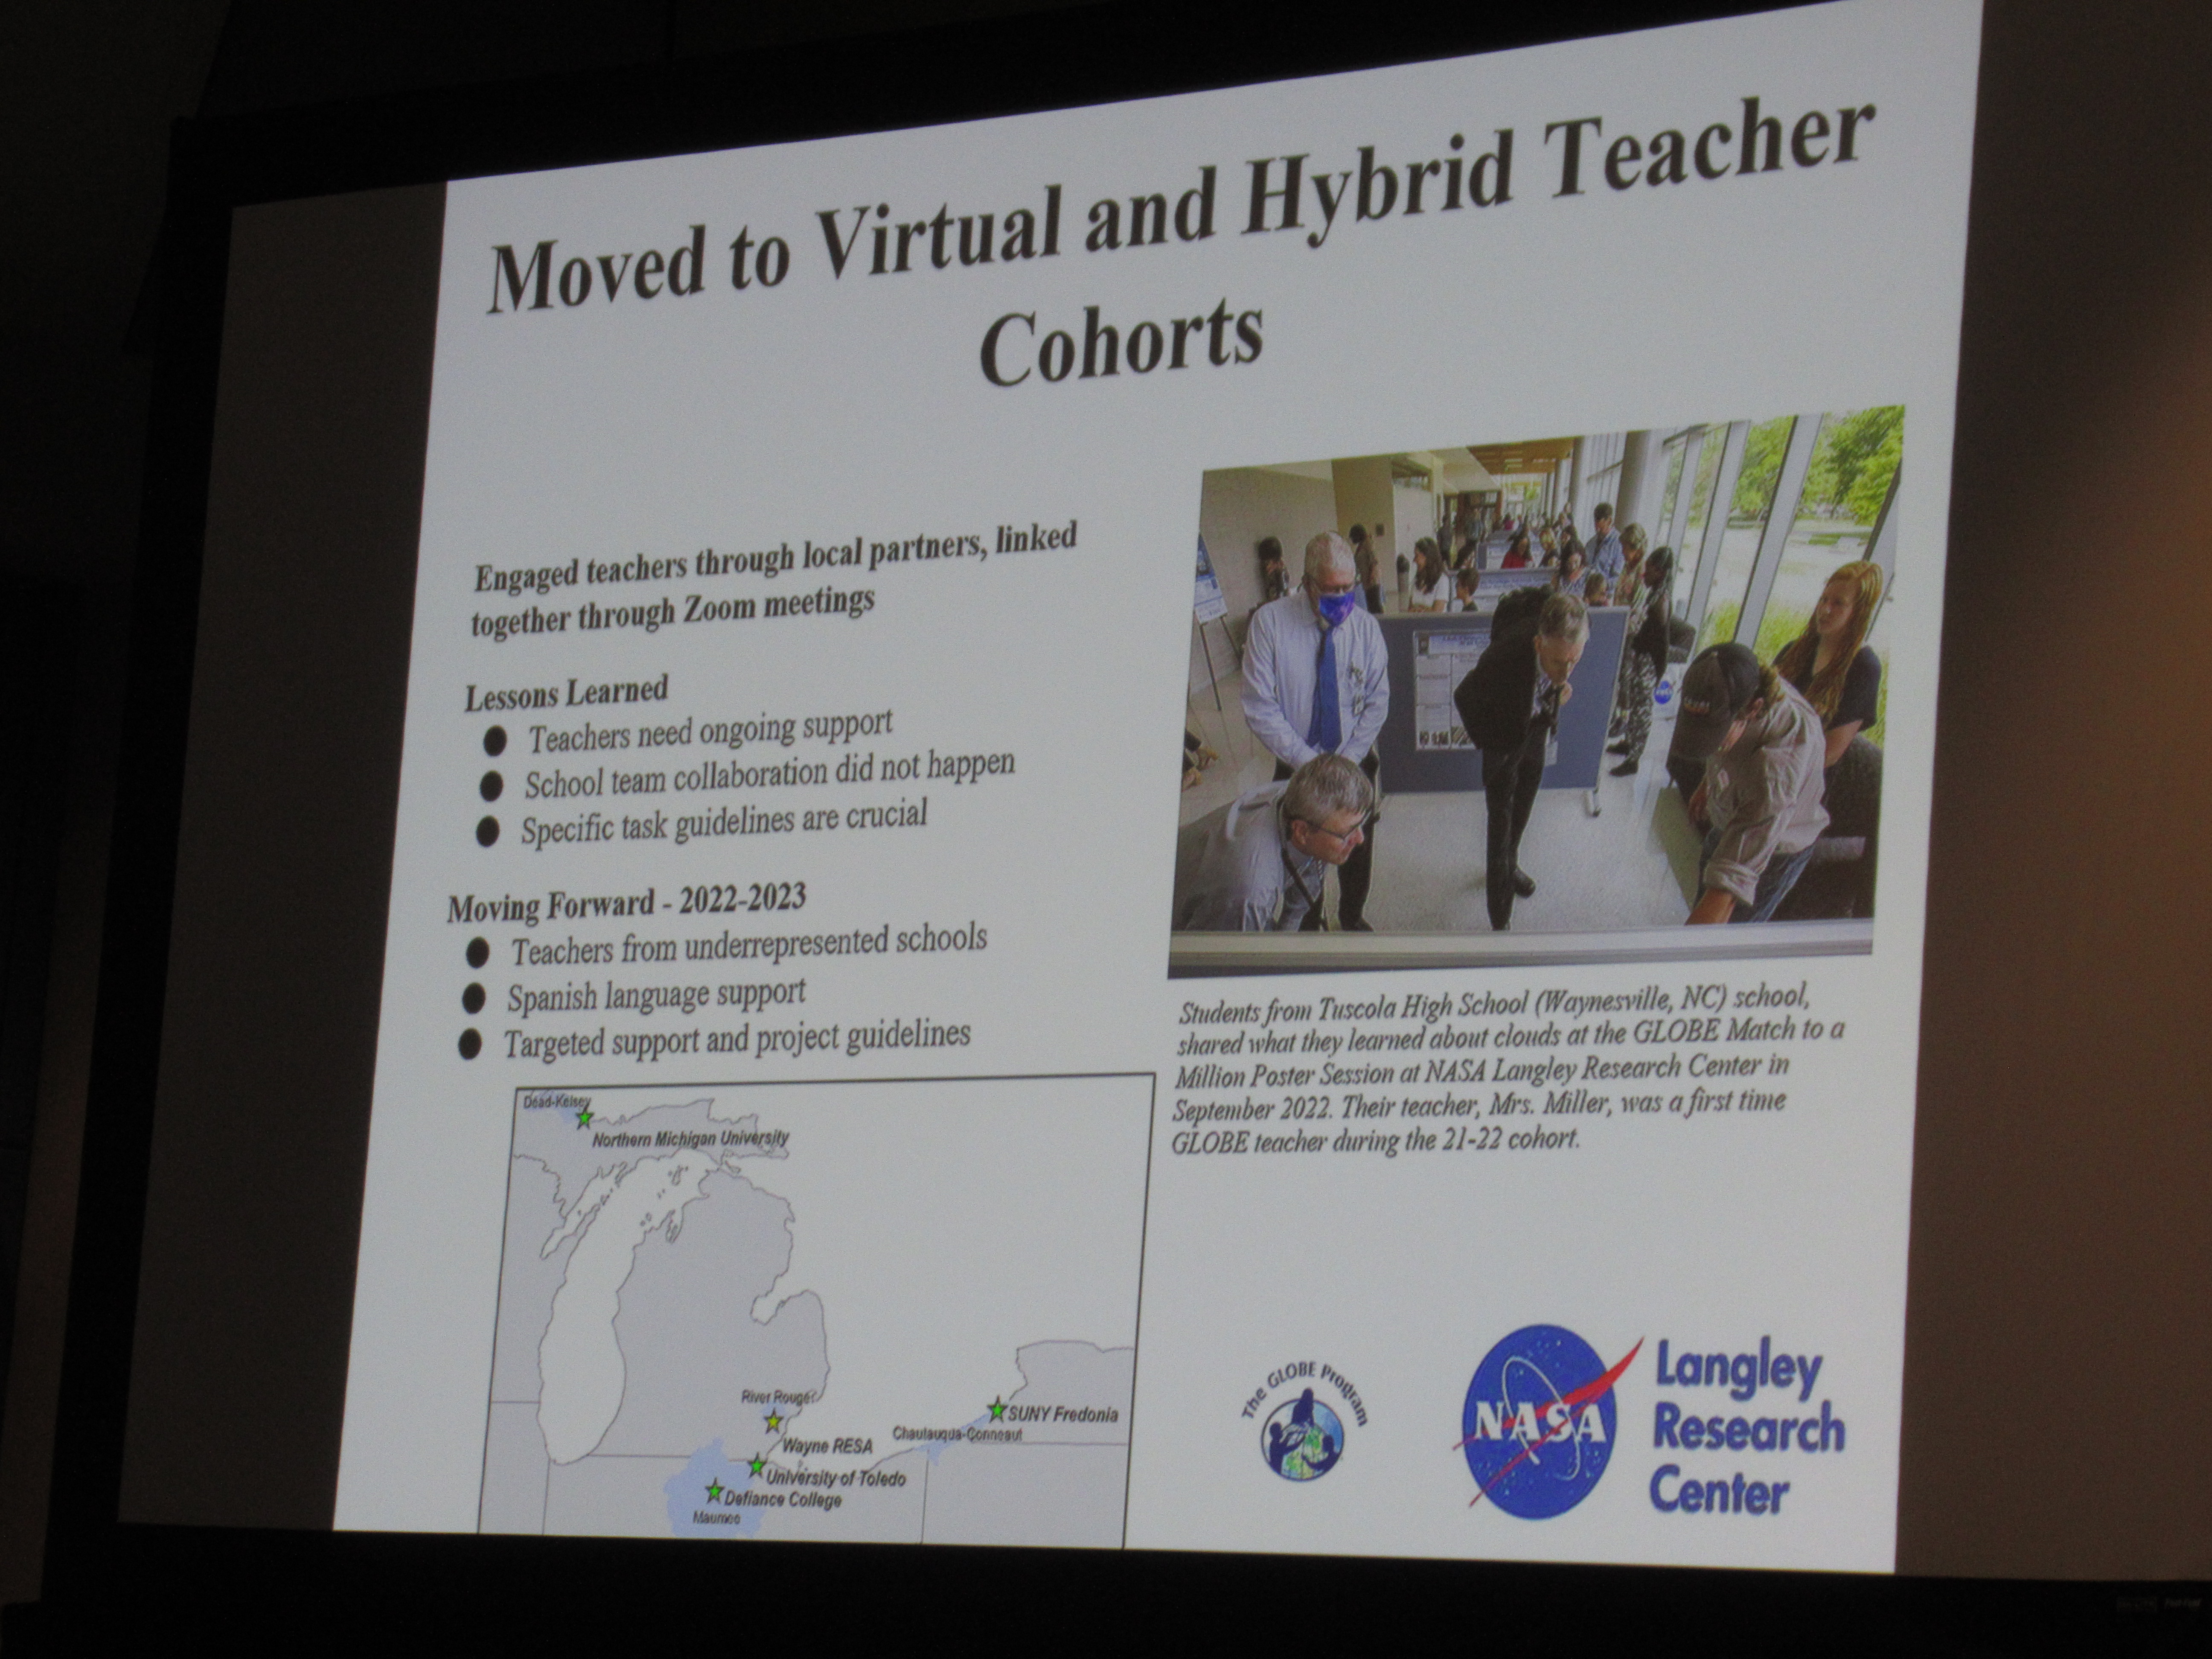 A presentation slide with the title, “Moved to Virtual and Hybrid Teacher Cohorts.”